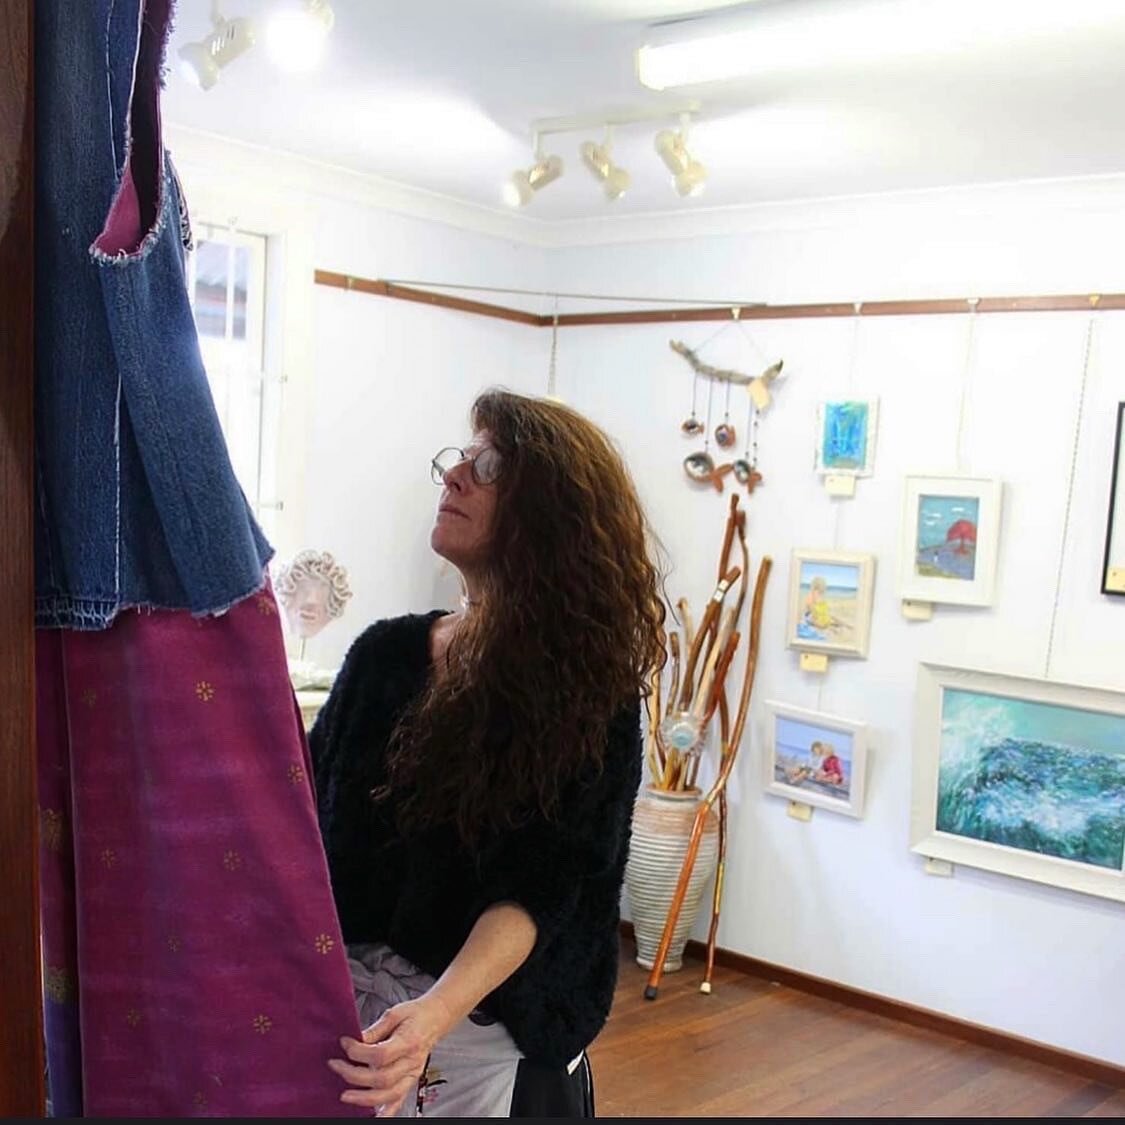 The stunning Liveringa Art Gallery complete with pieces produced by local artists ✨
.
If you are interesting in developing your creative practice, the @pinjarra_art_hub run a number of diverse and  creative workshops and classes from right here in th